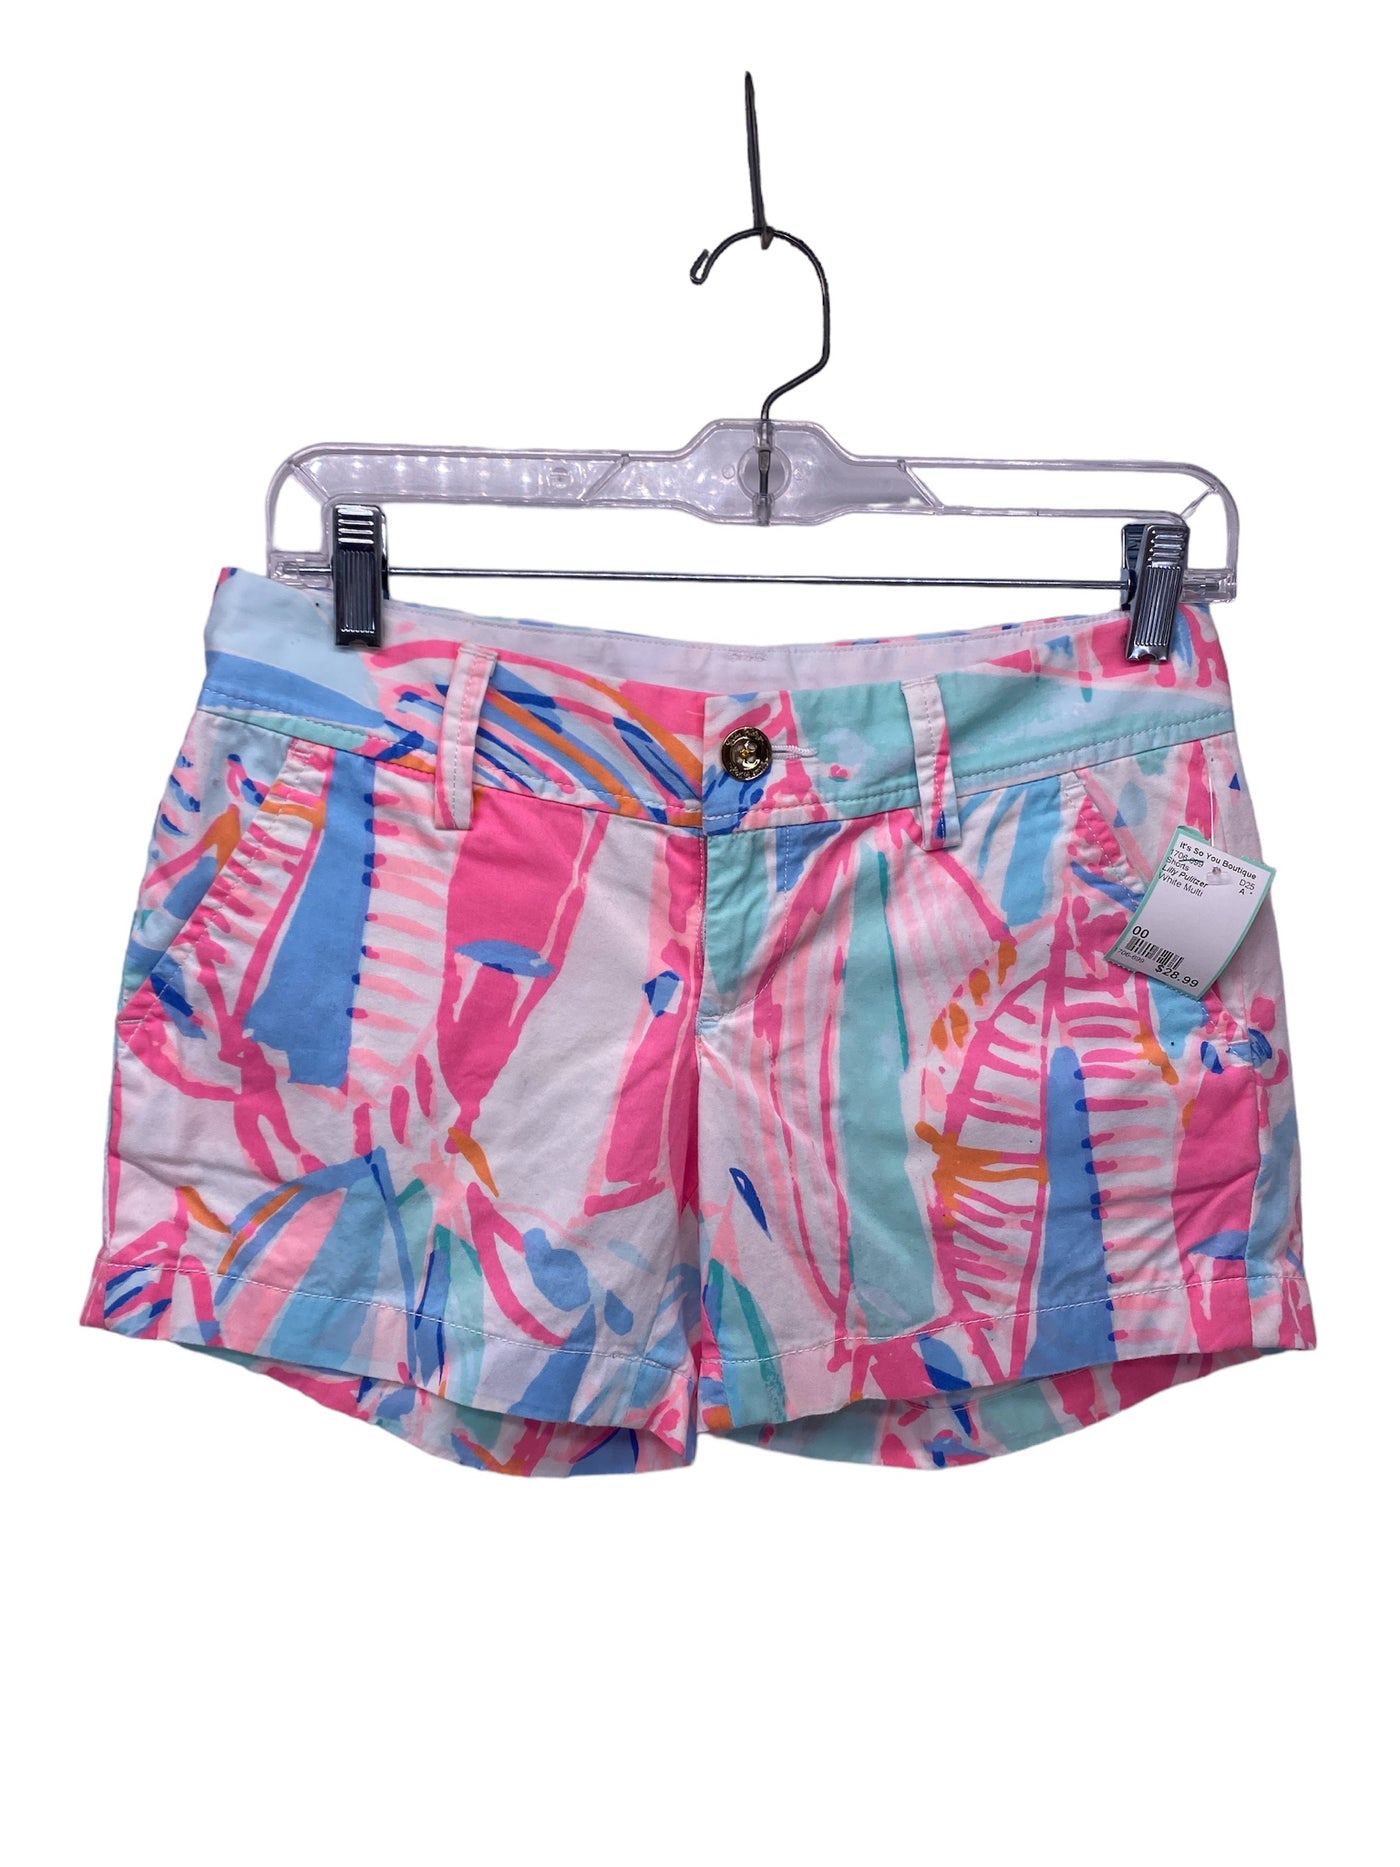 Lilly Pulitzer Misses Size 00 White Multi Shorts